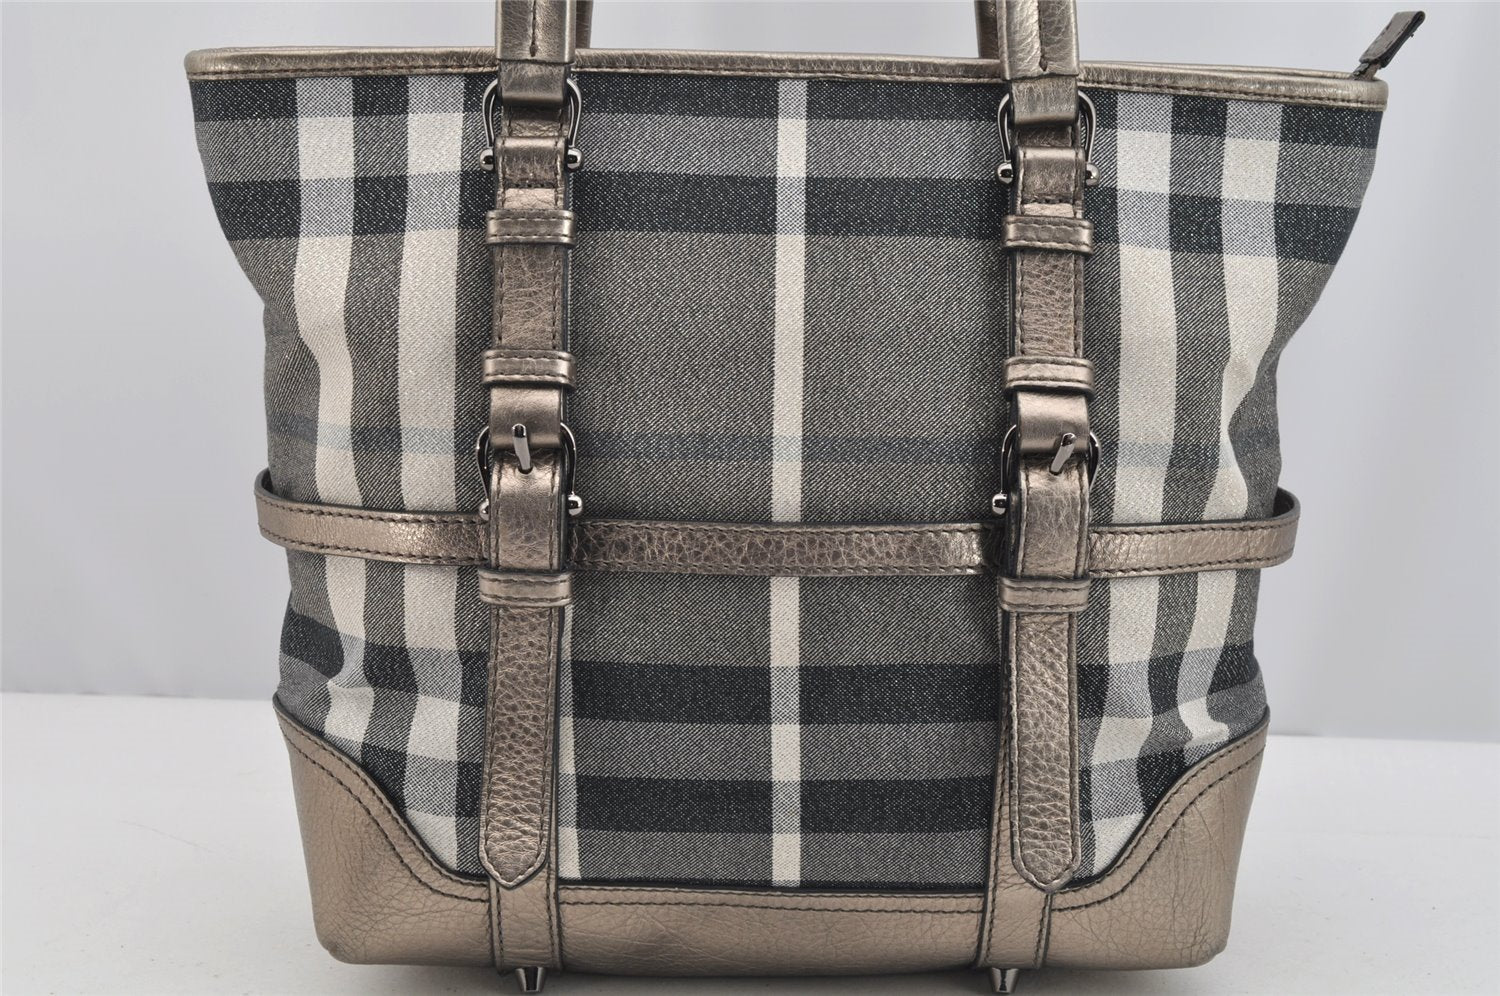 Authentic BURBERRY Vintage Check Shoulder Tote Bag Canvas Leather Gray 3166I